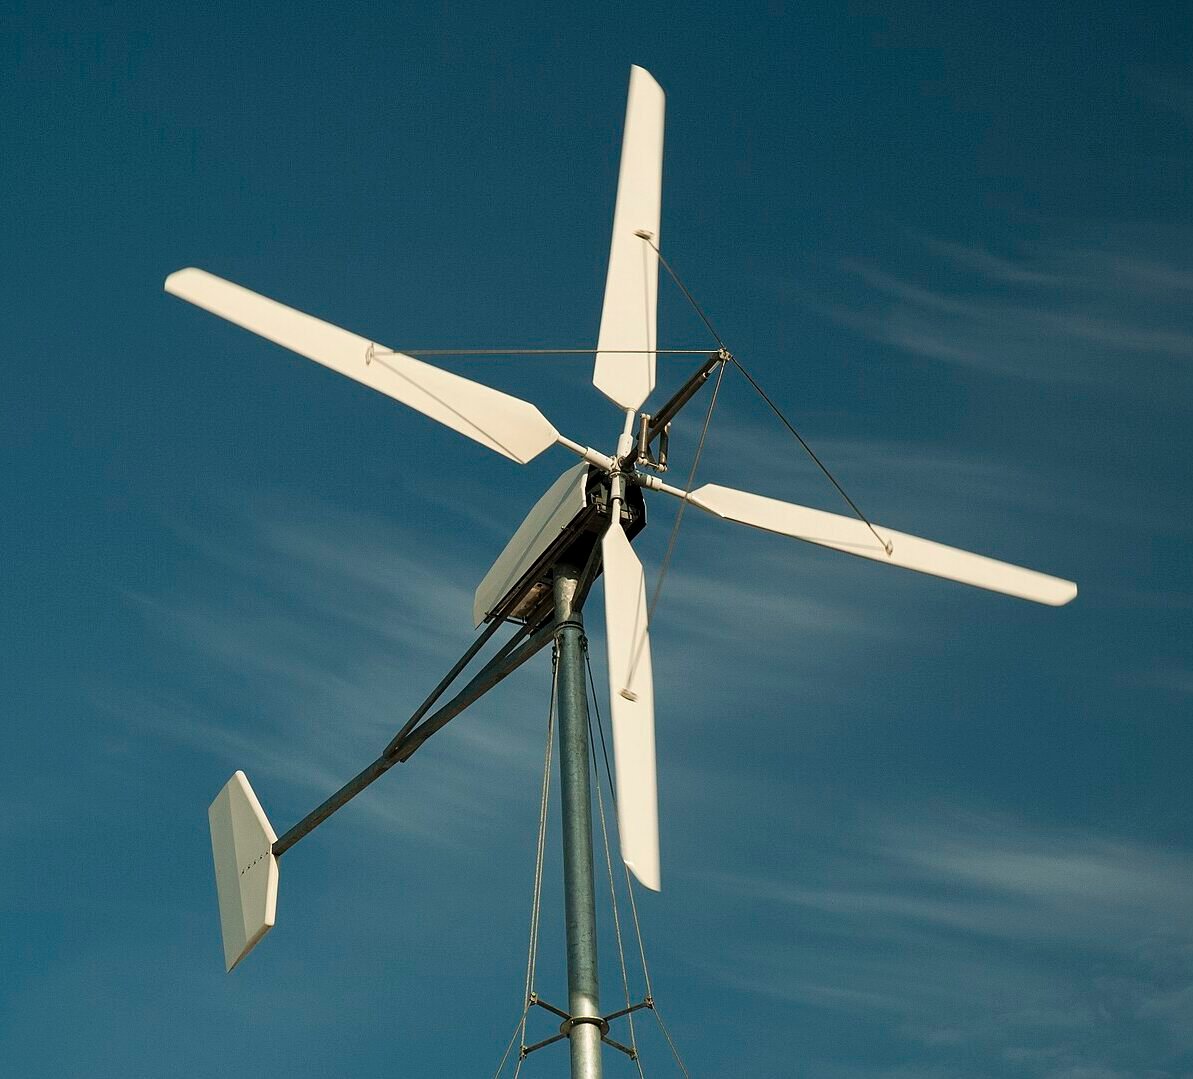 Home Wind Energy: Answering the 6 Most Common Questions